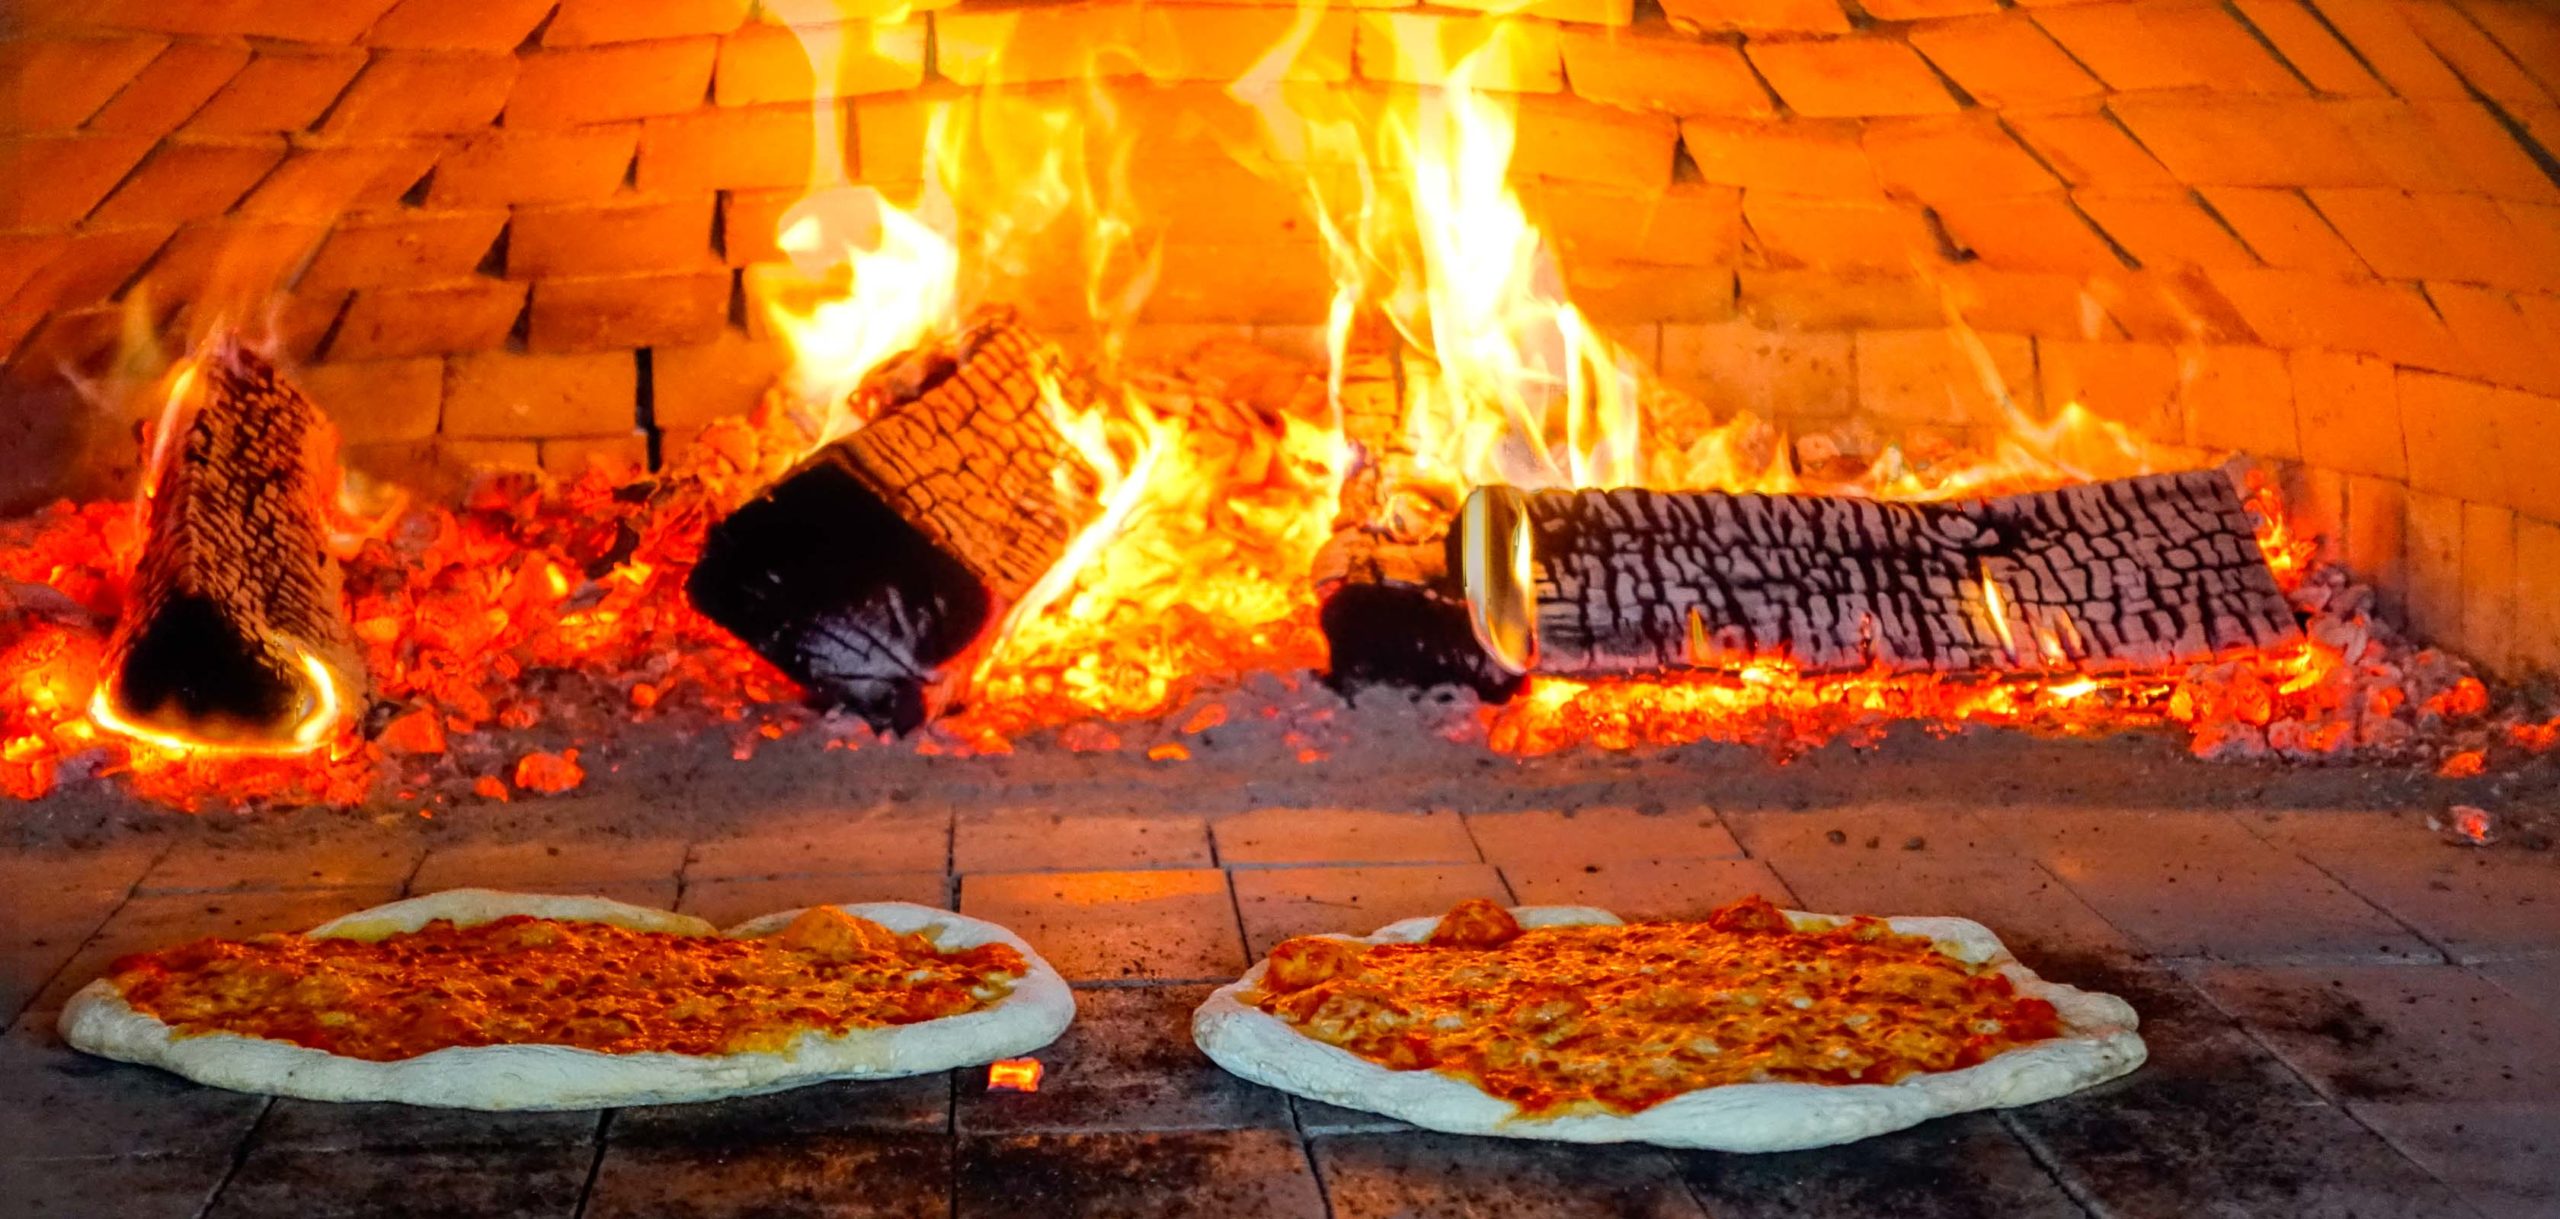 Pizzas being fired in a wood burning stove.